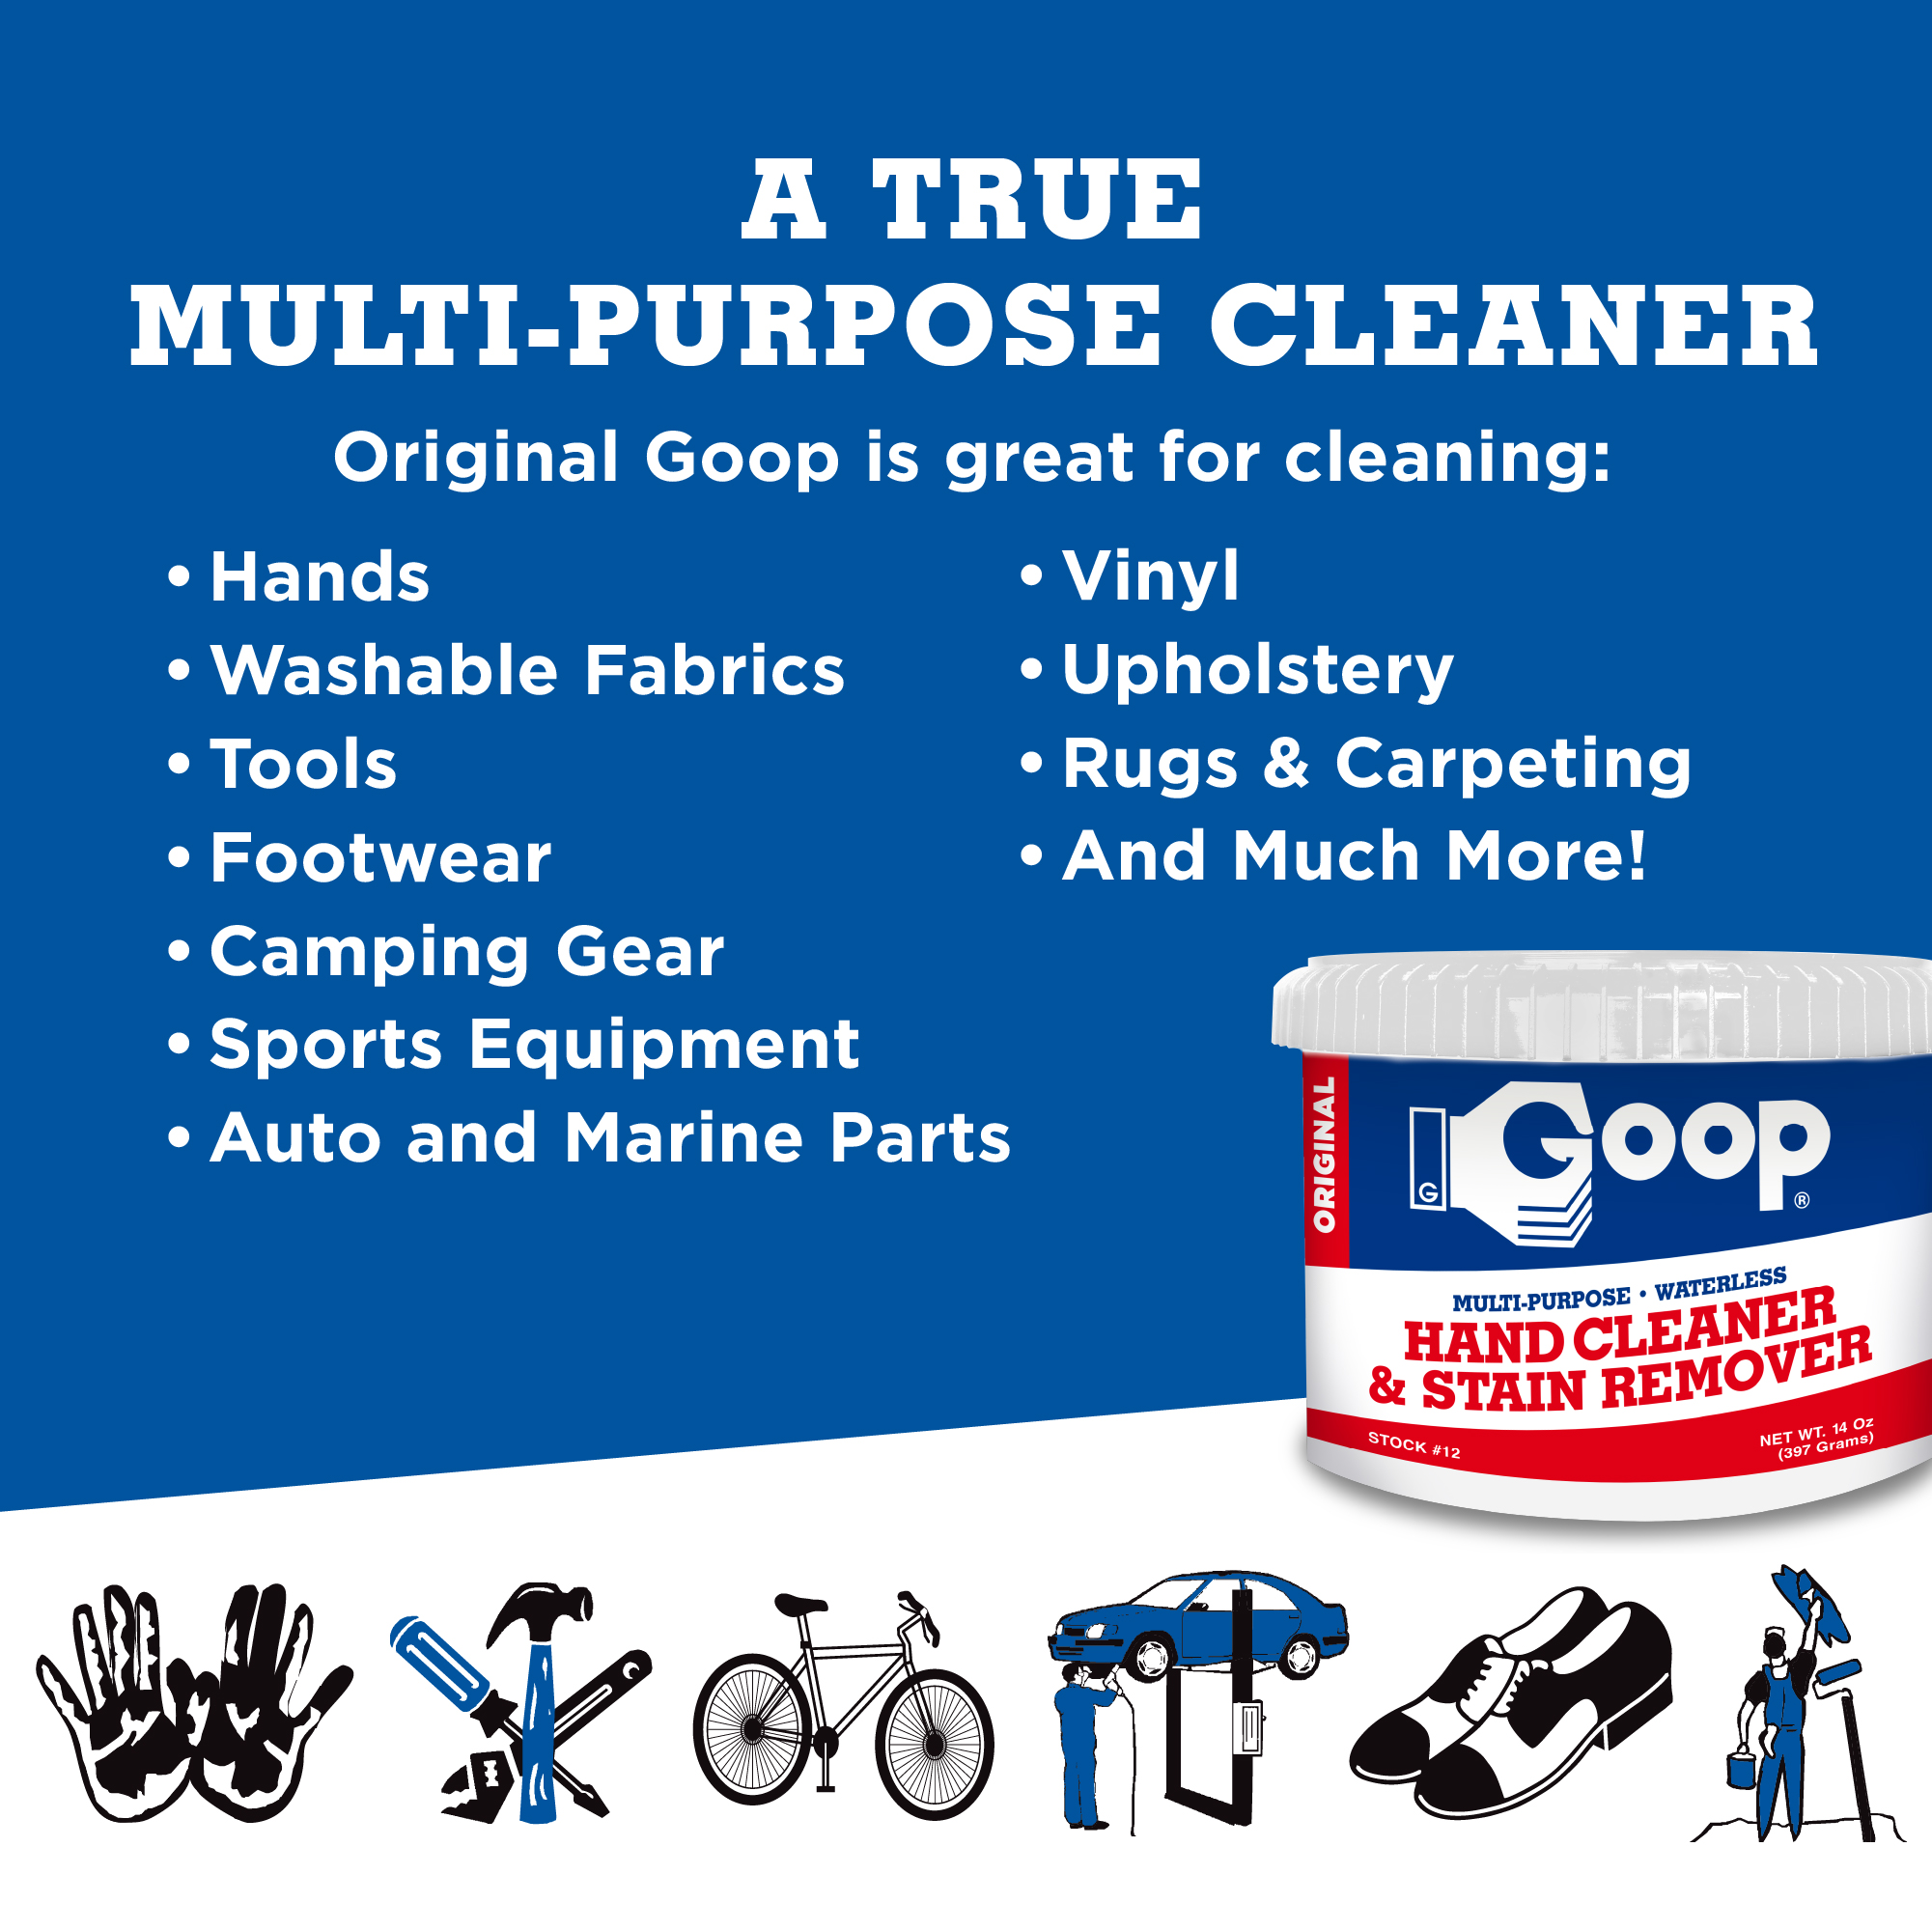 GOOP Multi-Purpose Hand Cleaner and Stain Remover, 14 oz container 